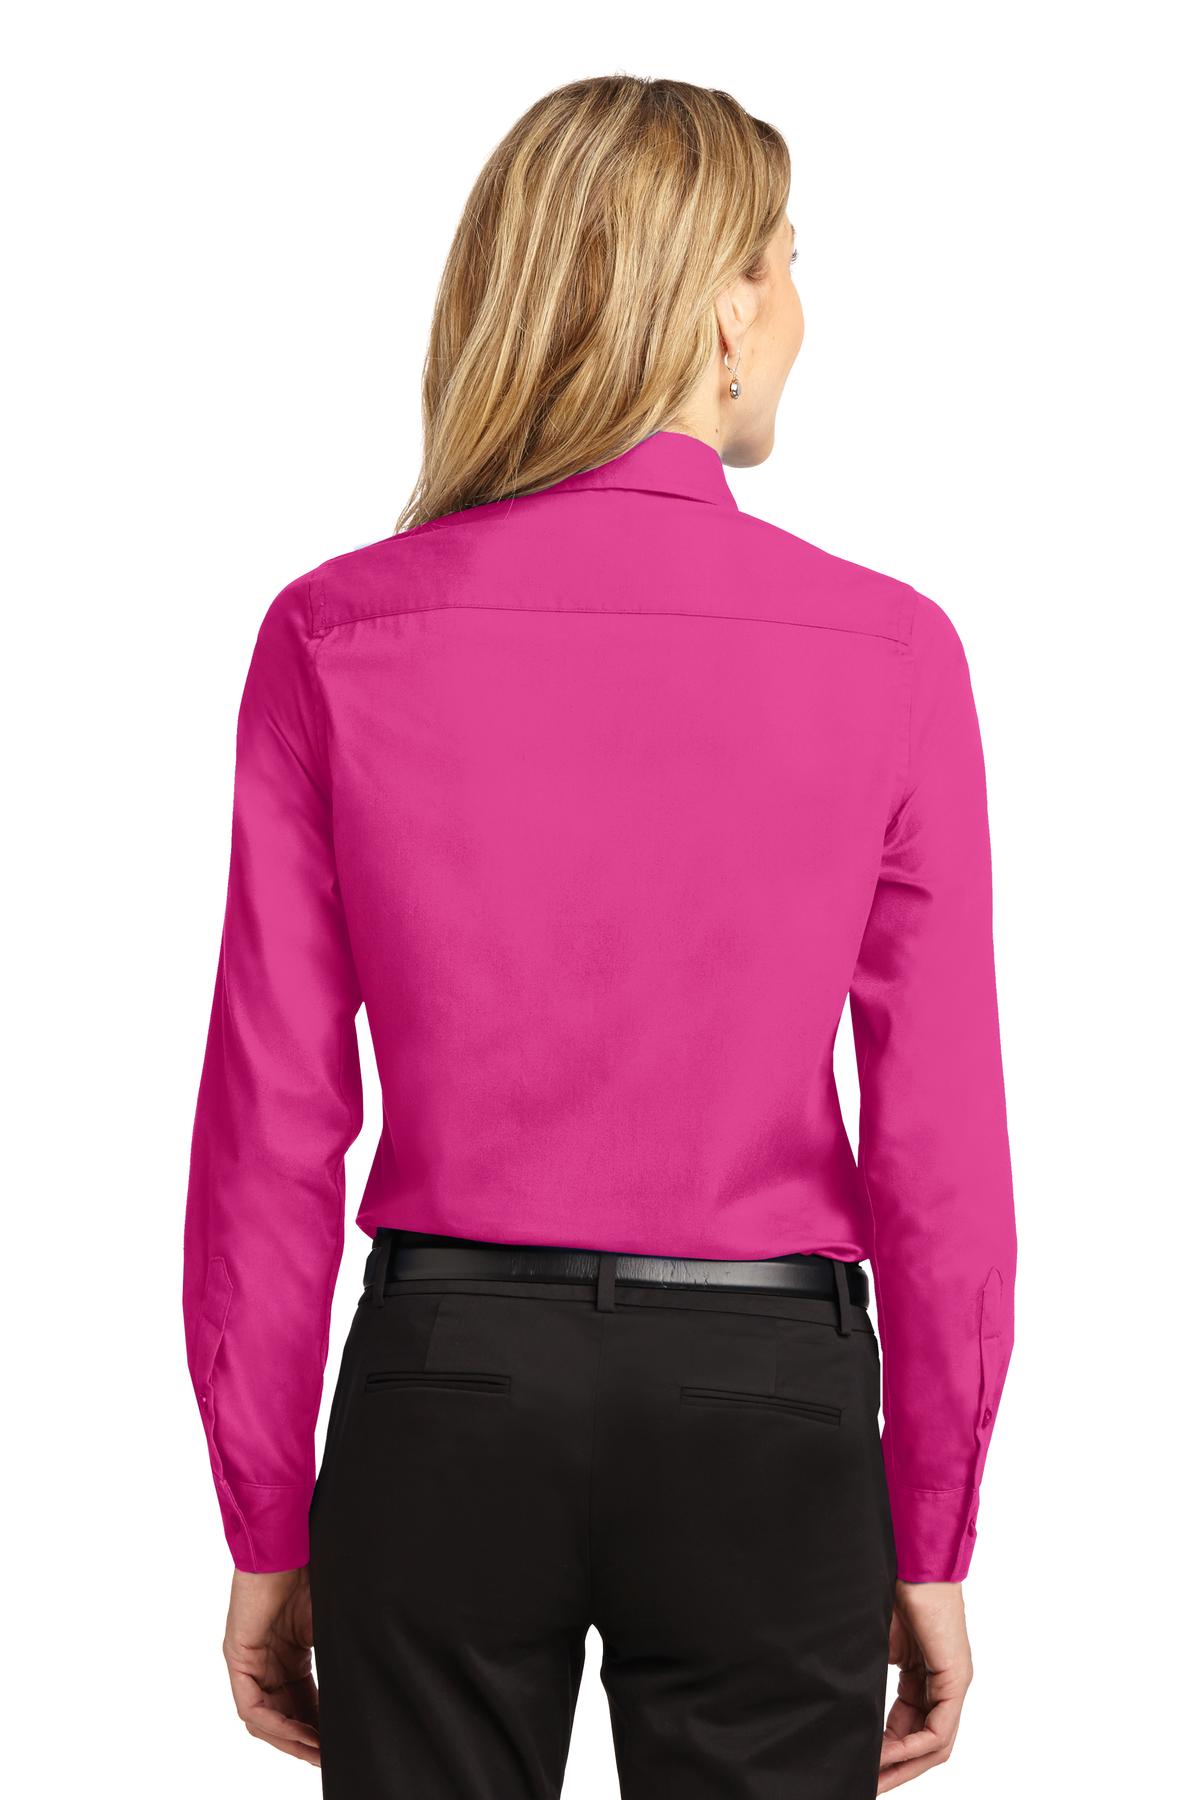 Port Authority ® Ladies Long Sleeve Easy Care Shirt. L608 - image 2 of 6